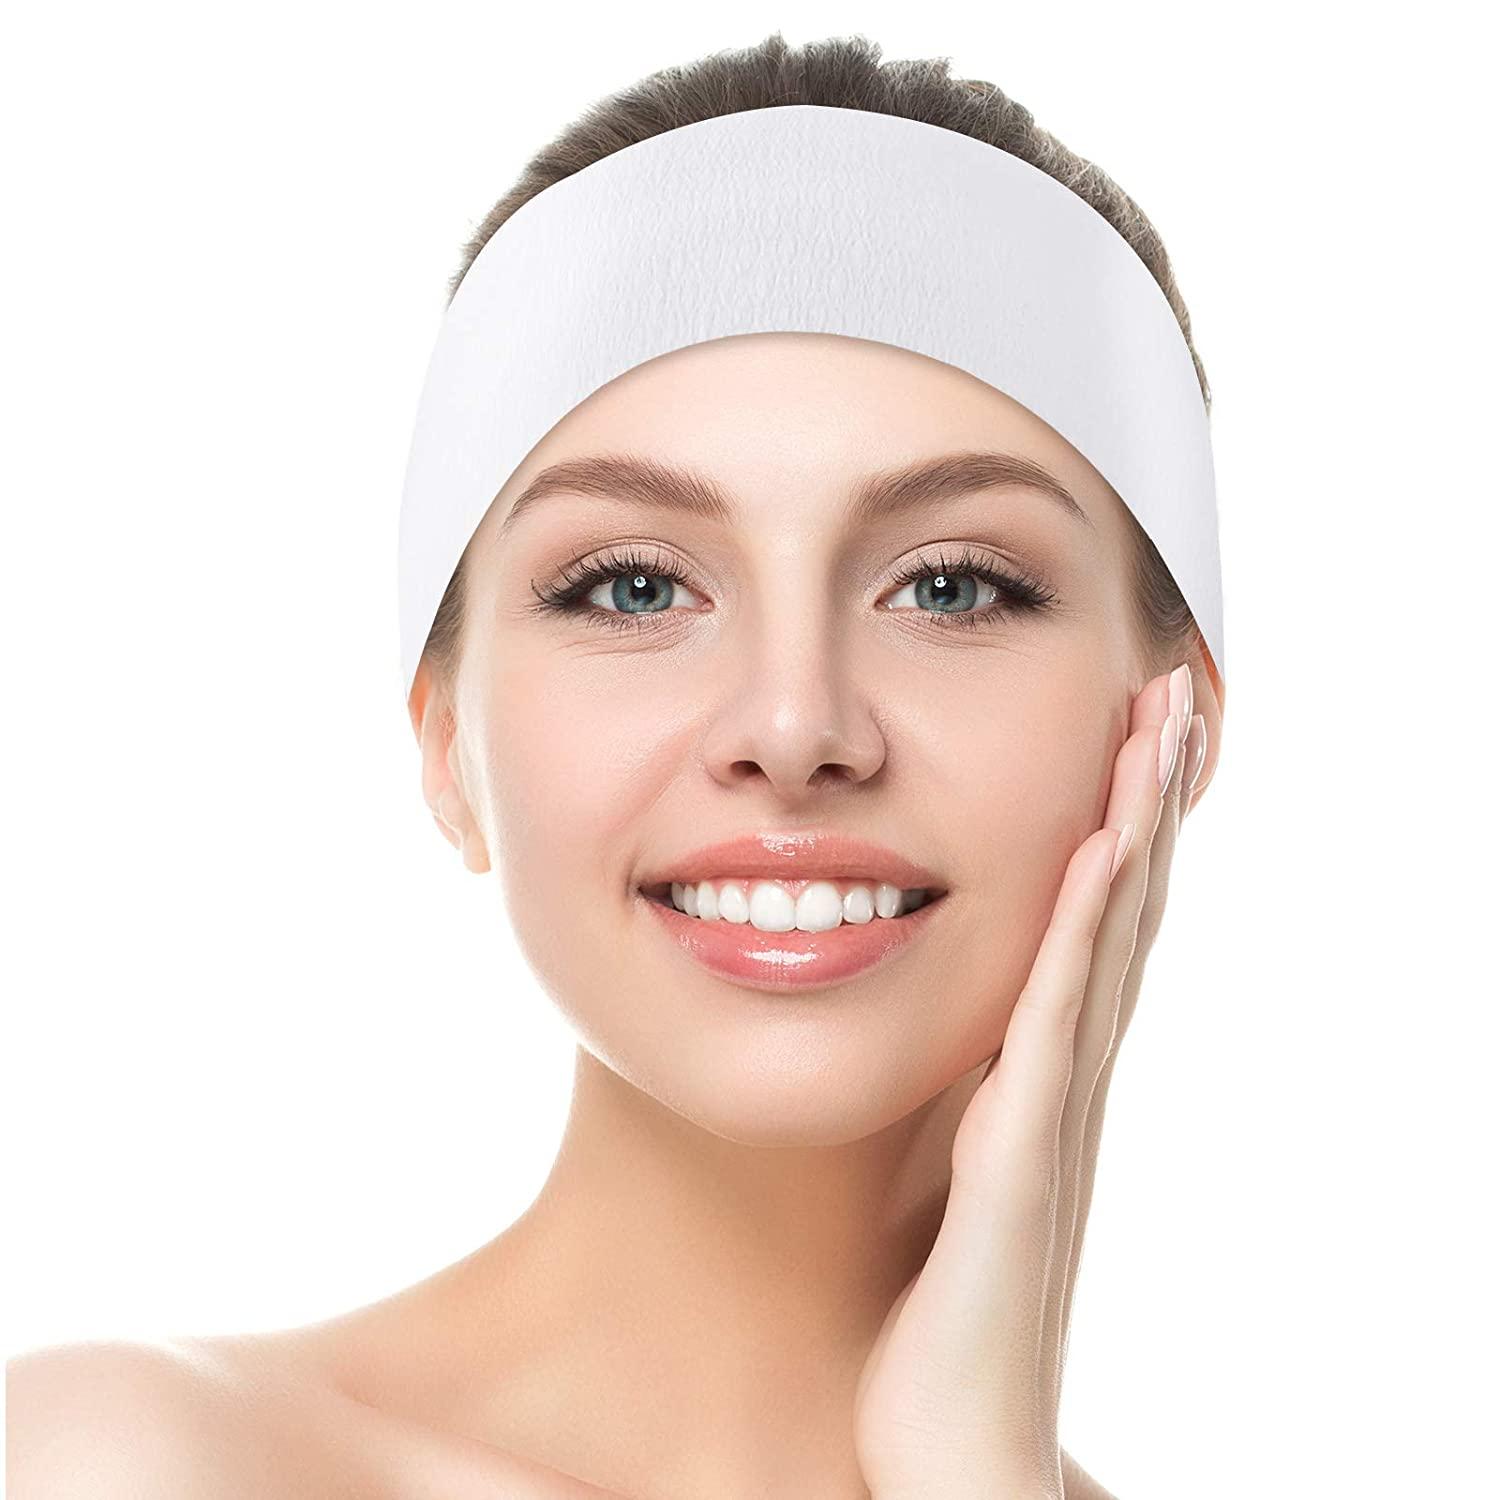 90 Pieces Disposable Spa Facial Headbands Stretch Non-Woven Facial Headband  Soft Skin Care Hair Band with Convenient Closure for Women Girls Salons,  White